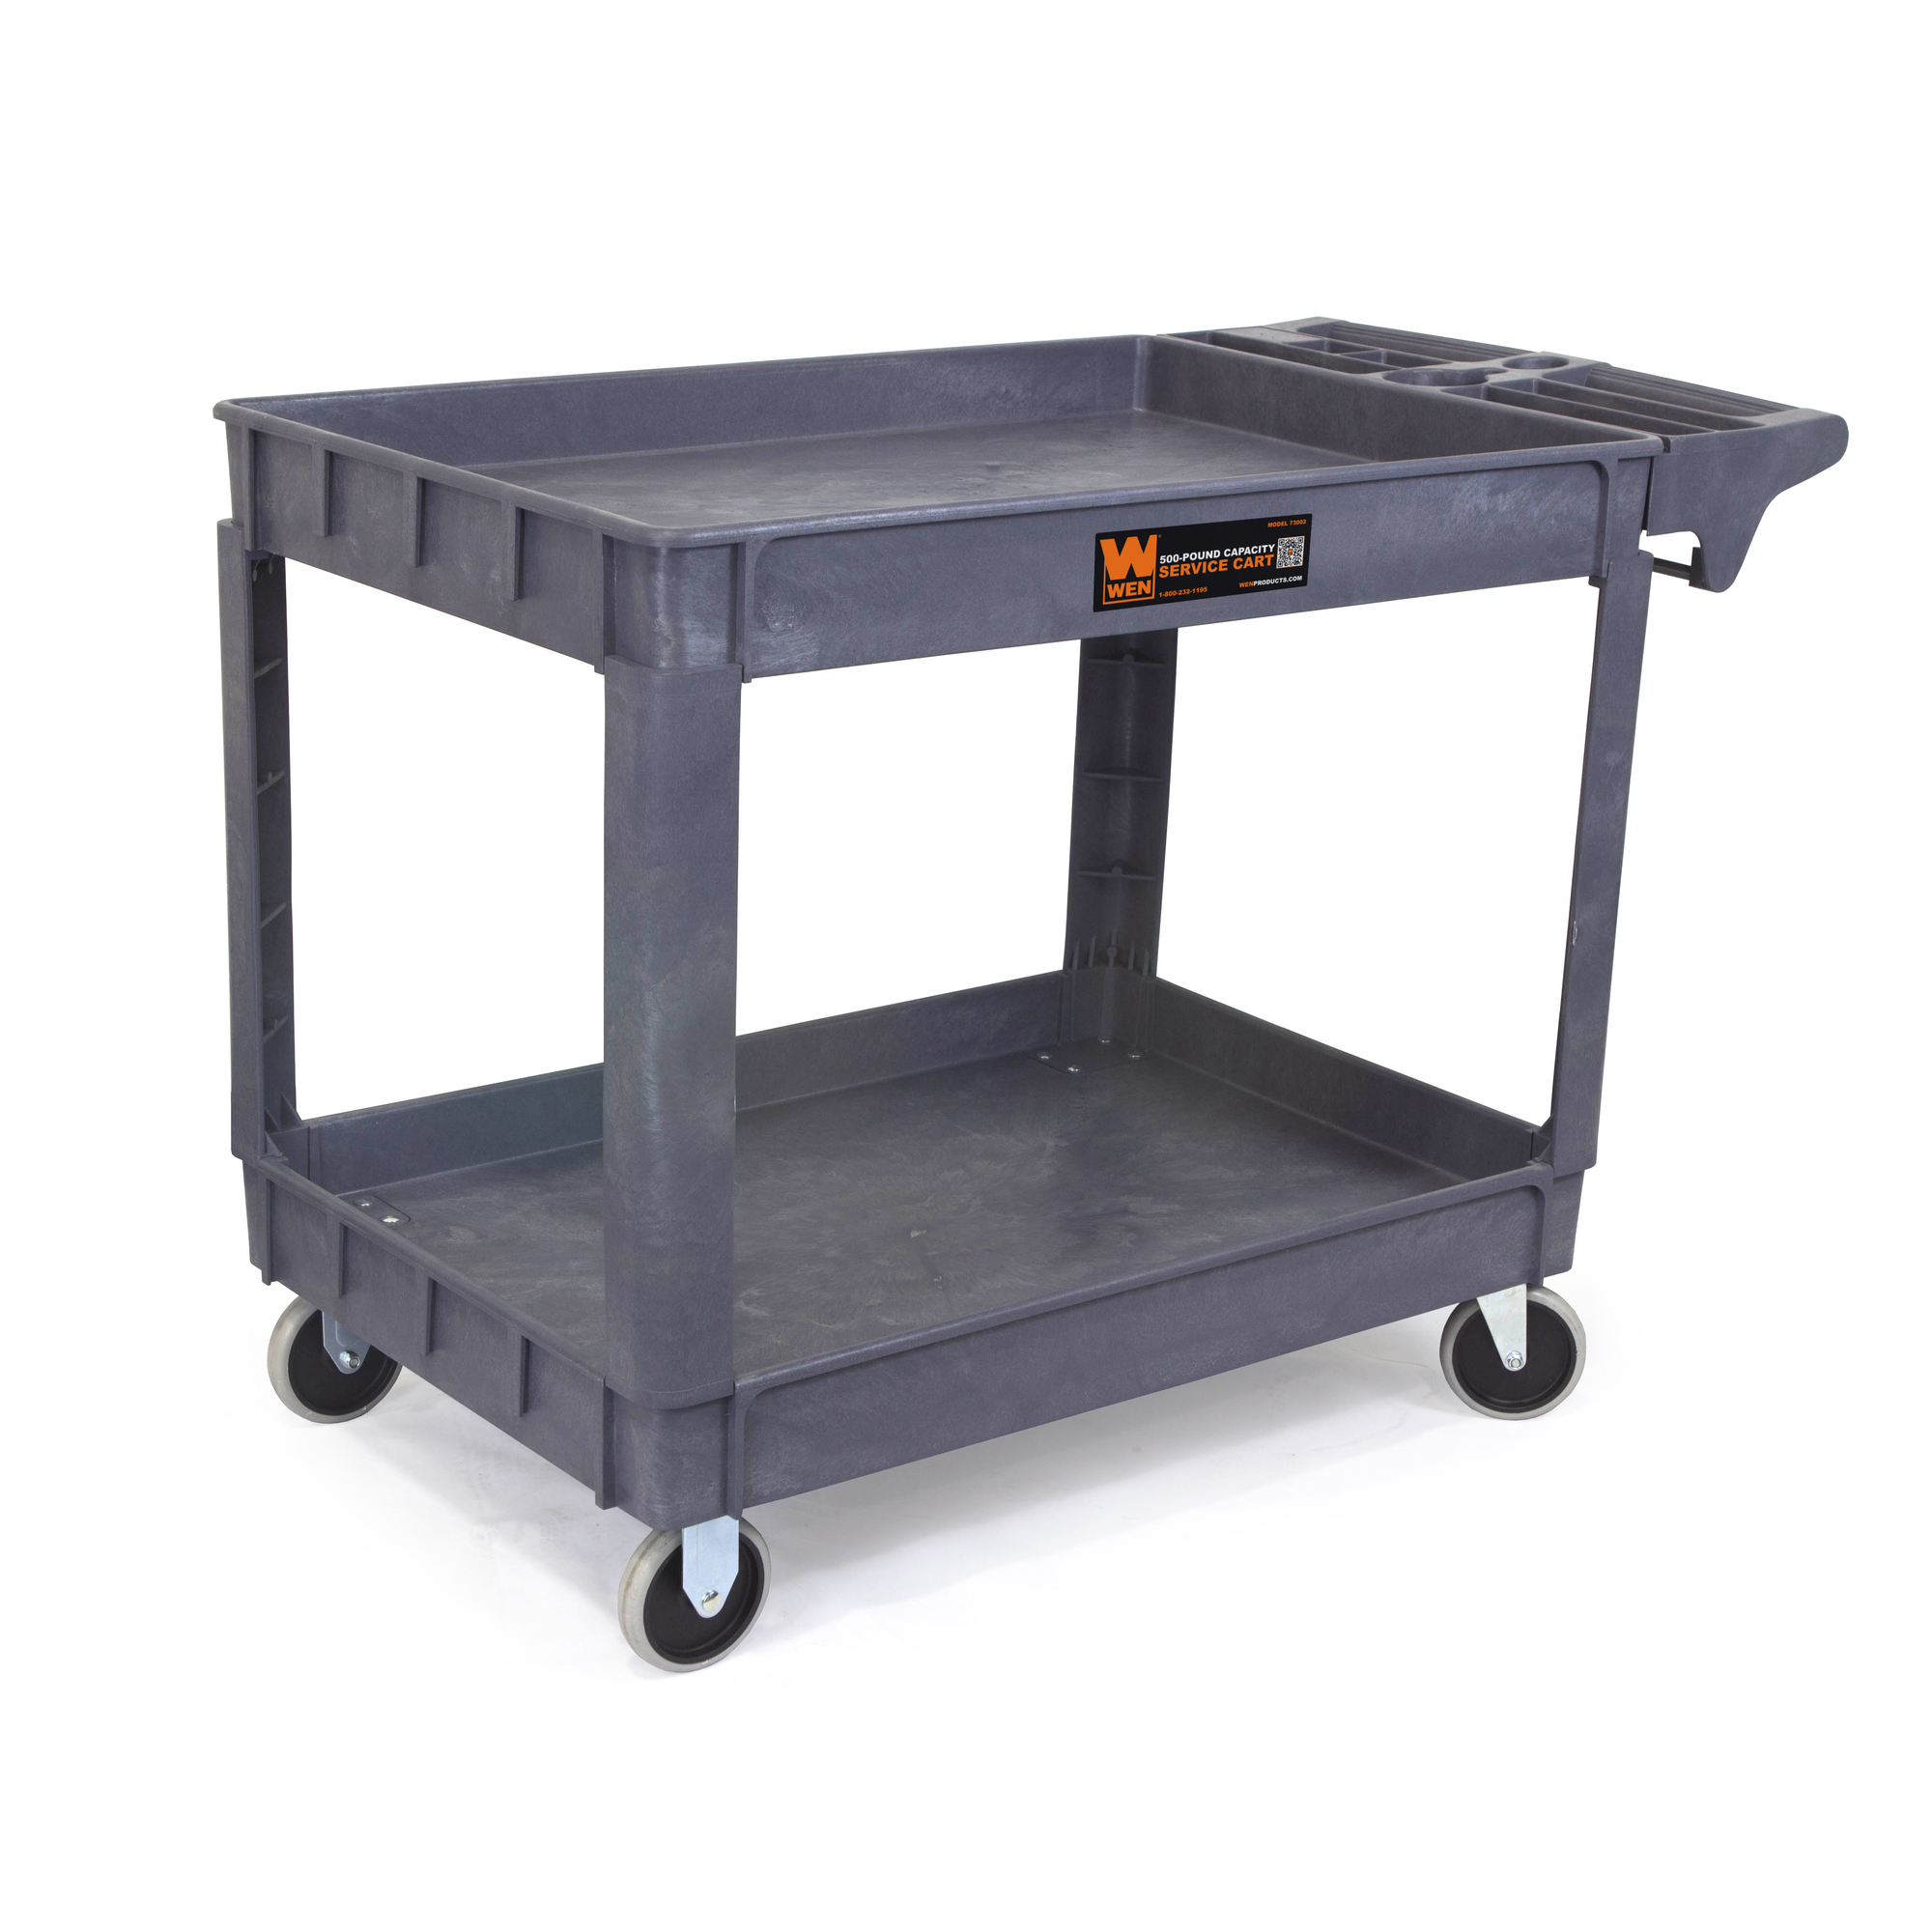 WEN, 500-Pound Capacity Service Cart (36Inch x 24Inch), Total Capacity 500 lb, Material Polypropylene, Model 73004